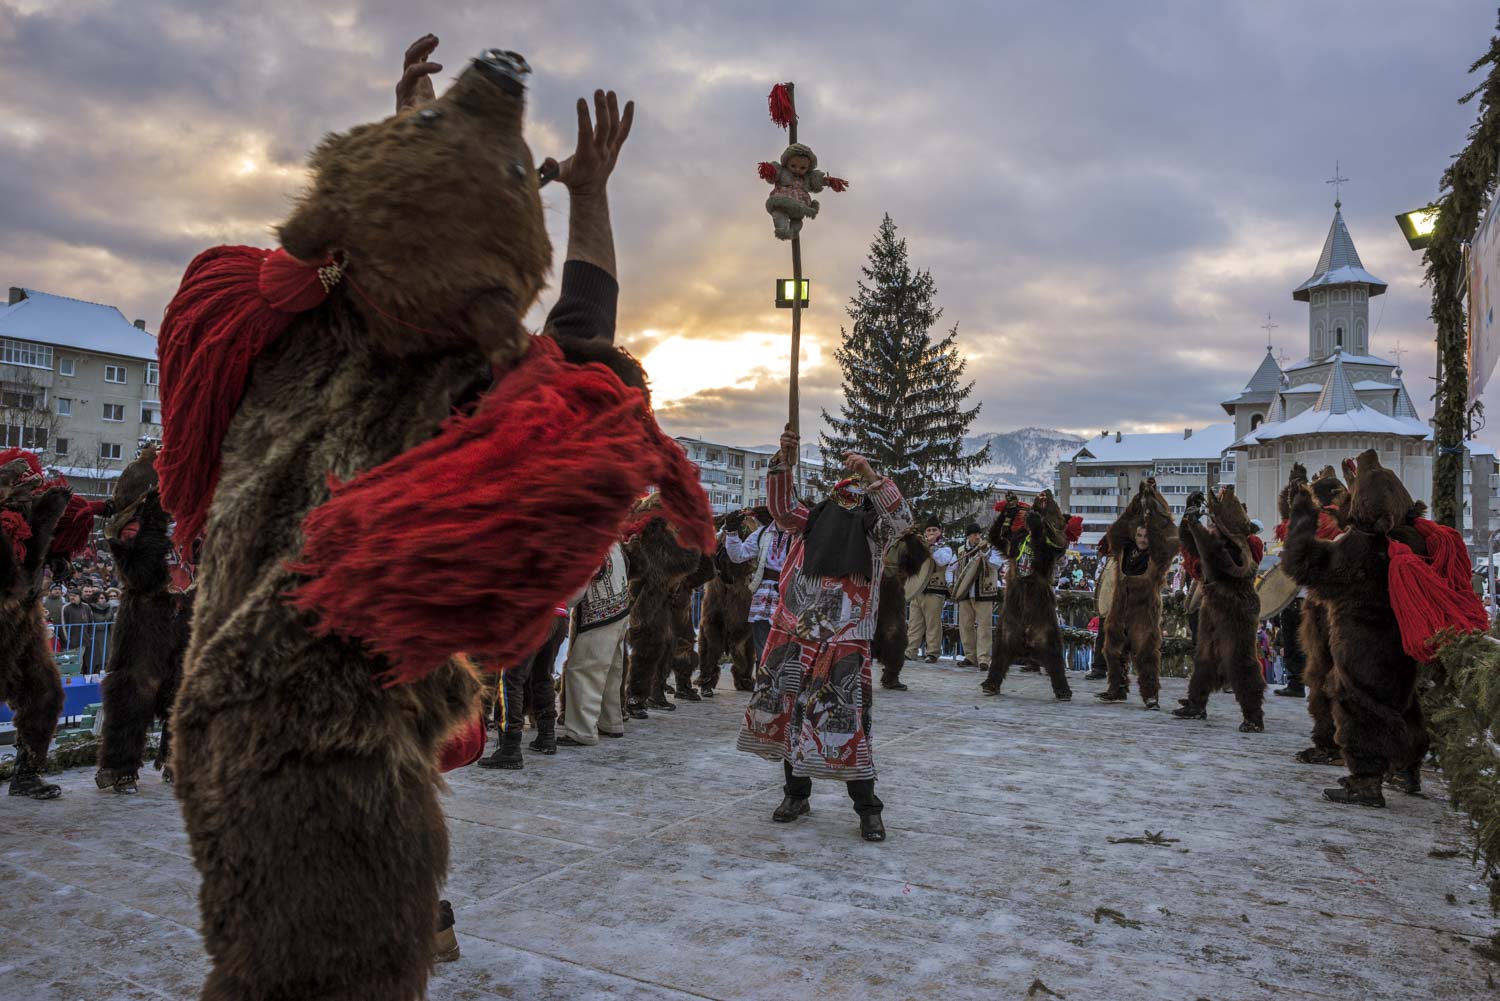  A troupe of bears performs on a stage set up in central  Comăneşti for the town's annual Bear Parade and competition. December 30, 2014. Comăneşti town, Bacău county, Romania. © Diana Zeyneb Alhindawi 